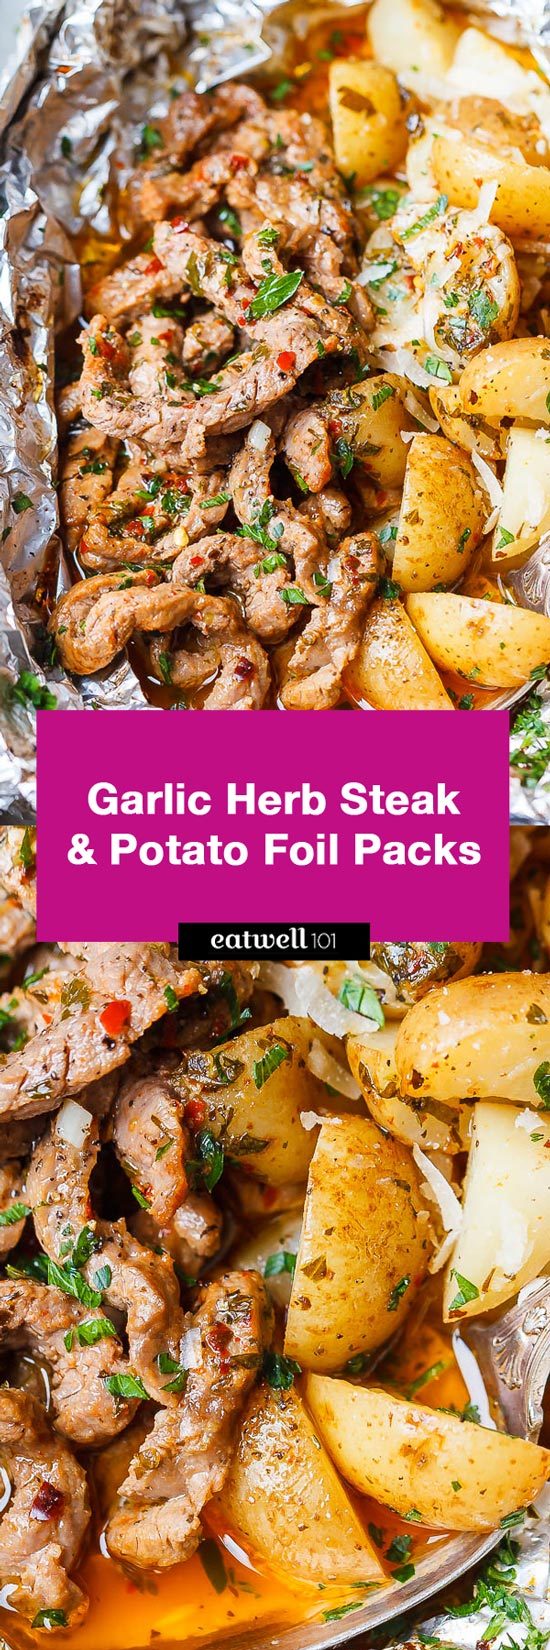 Steak & Potato Foil Packs - #steak #potato #foilpackets #eatwell101 #recipe - A quick, delicious and nourishing meal perfect for any occasion! 